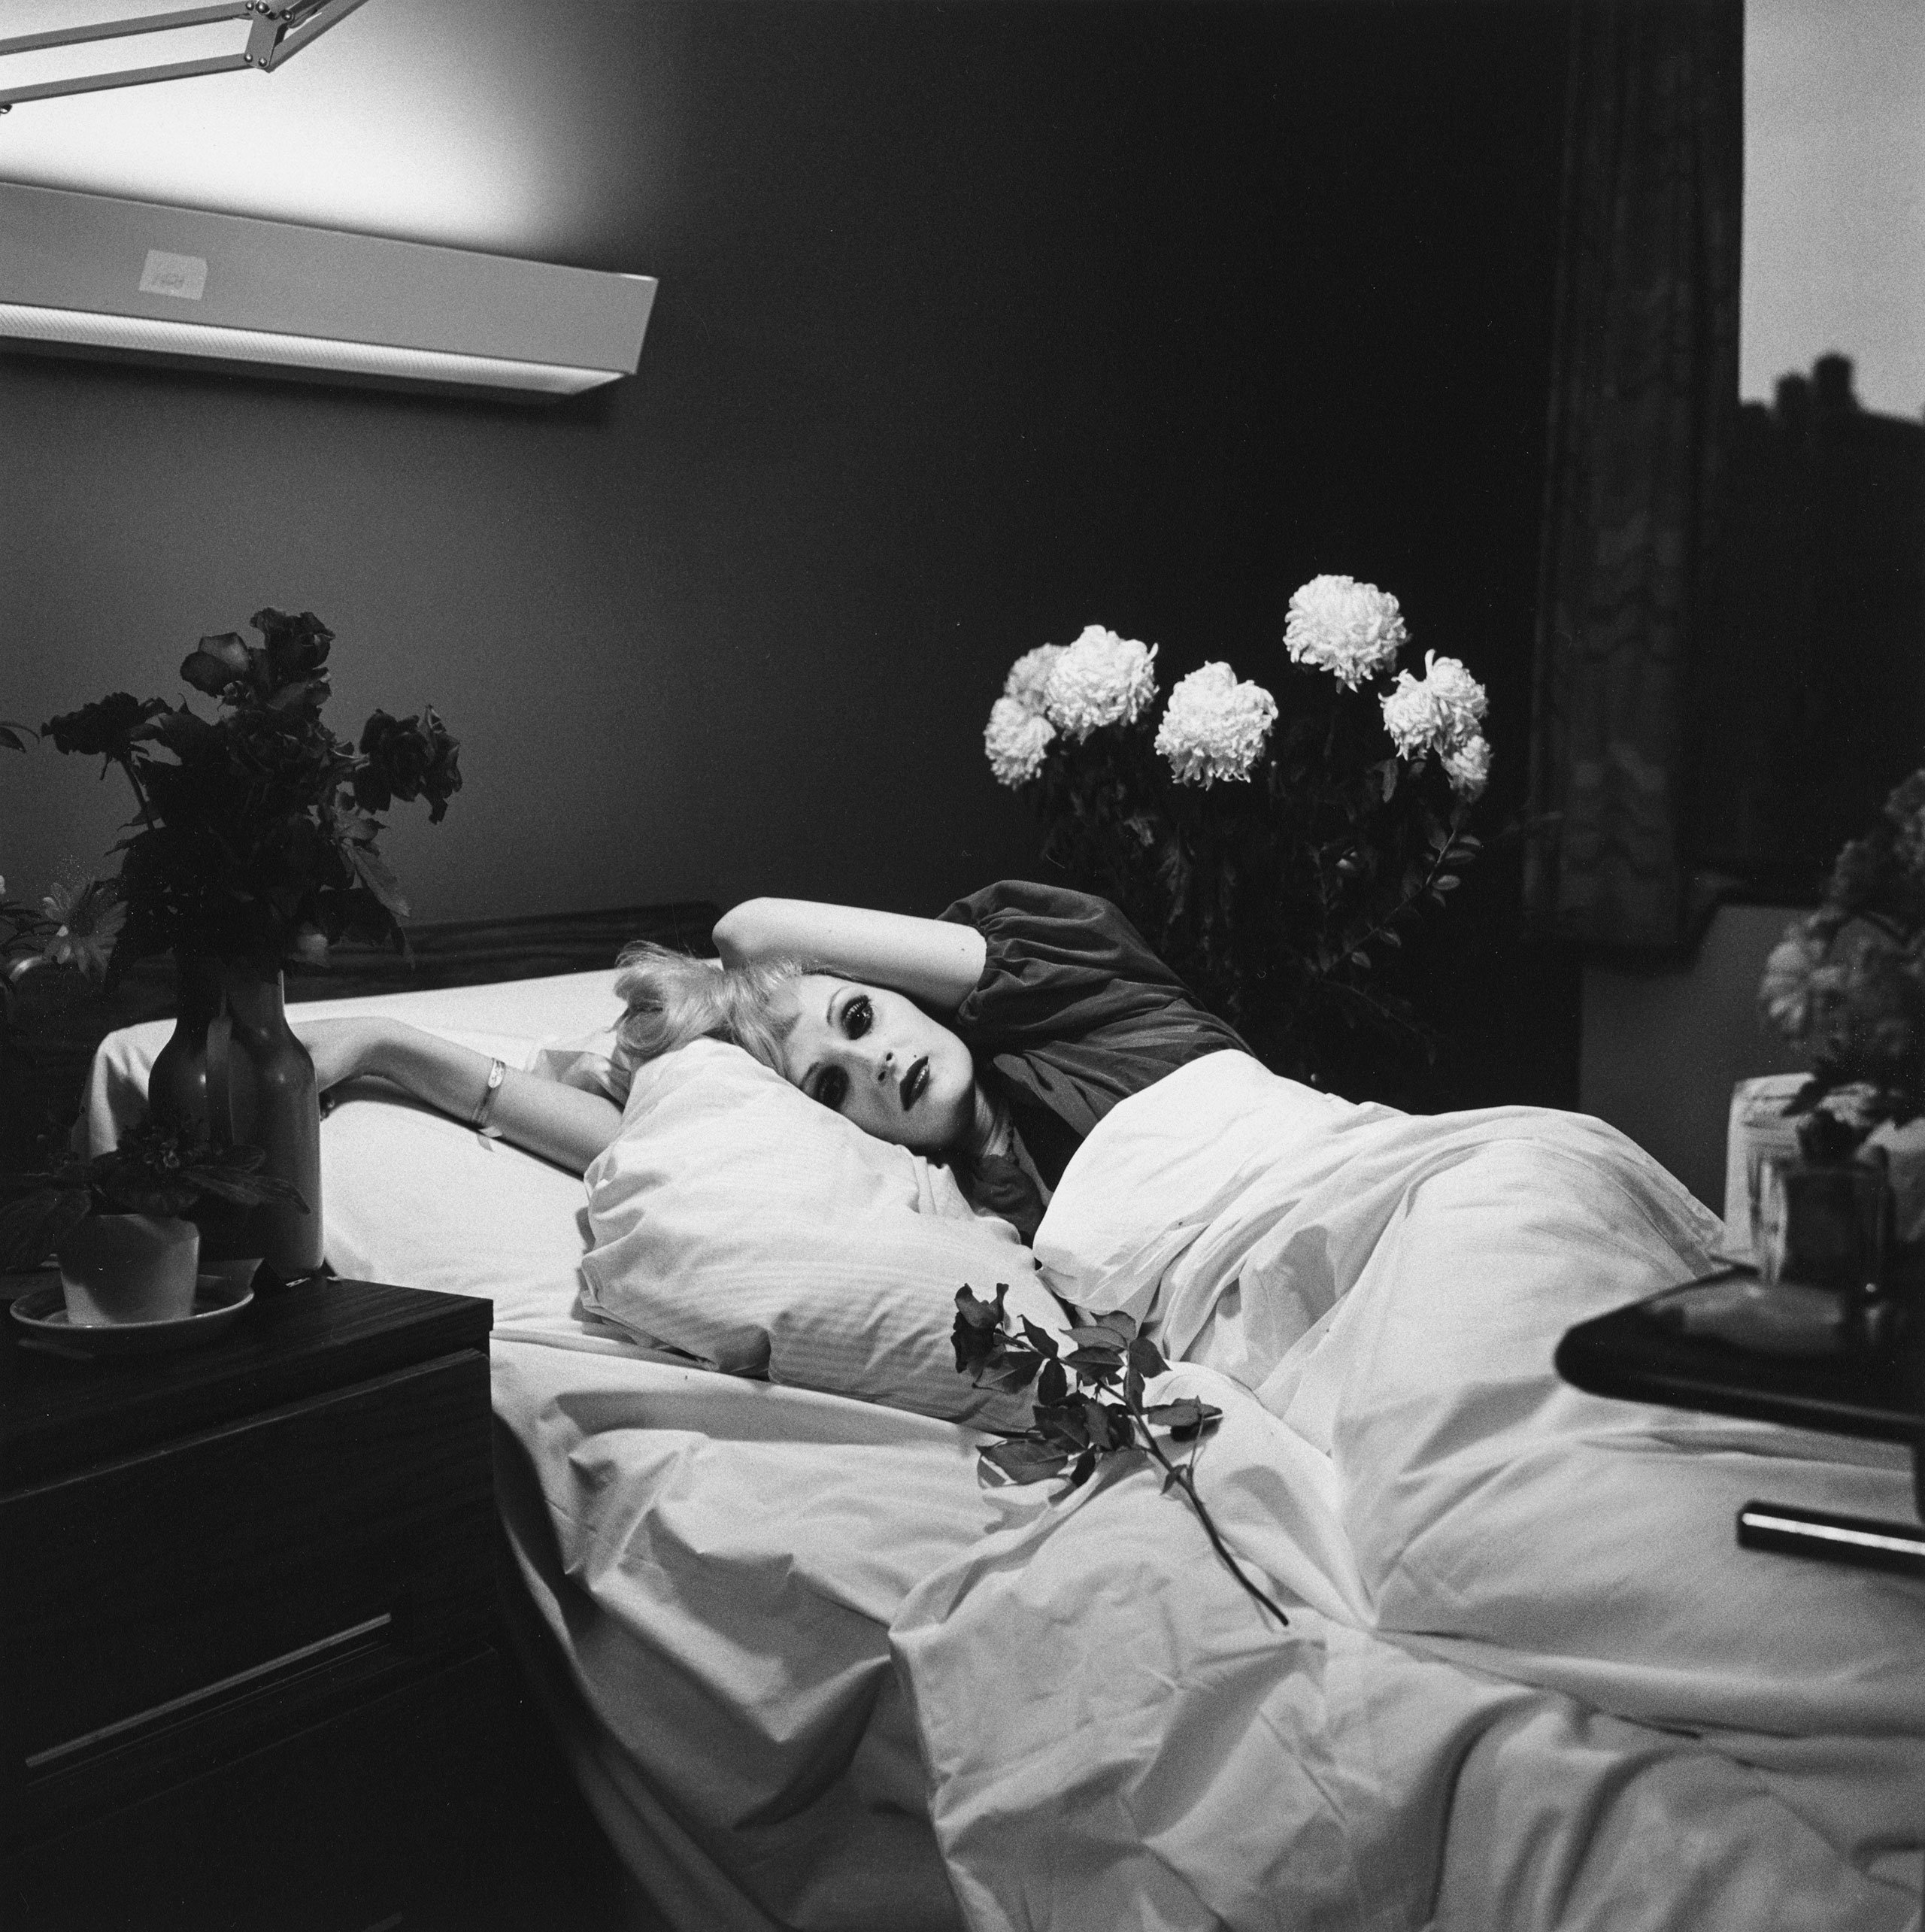 Peter Hujar, Candy Darling on her Deathbed, 1975.
© 2023 The Peter Hujar Archive, LLC  Artists Rights Society (ARS), New York.